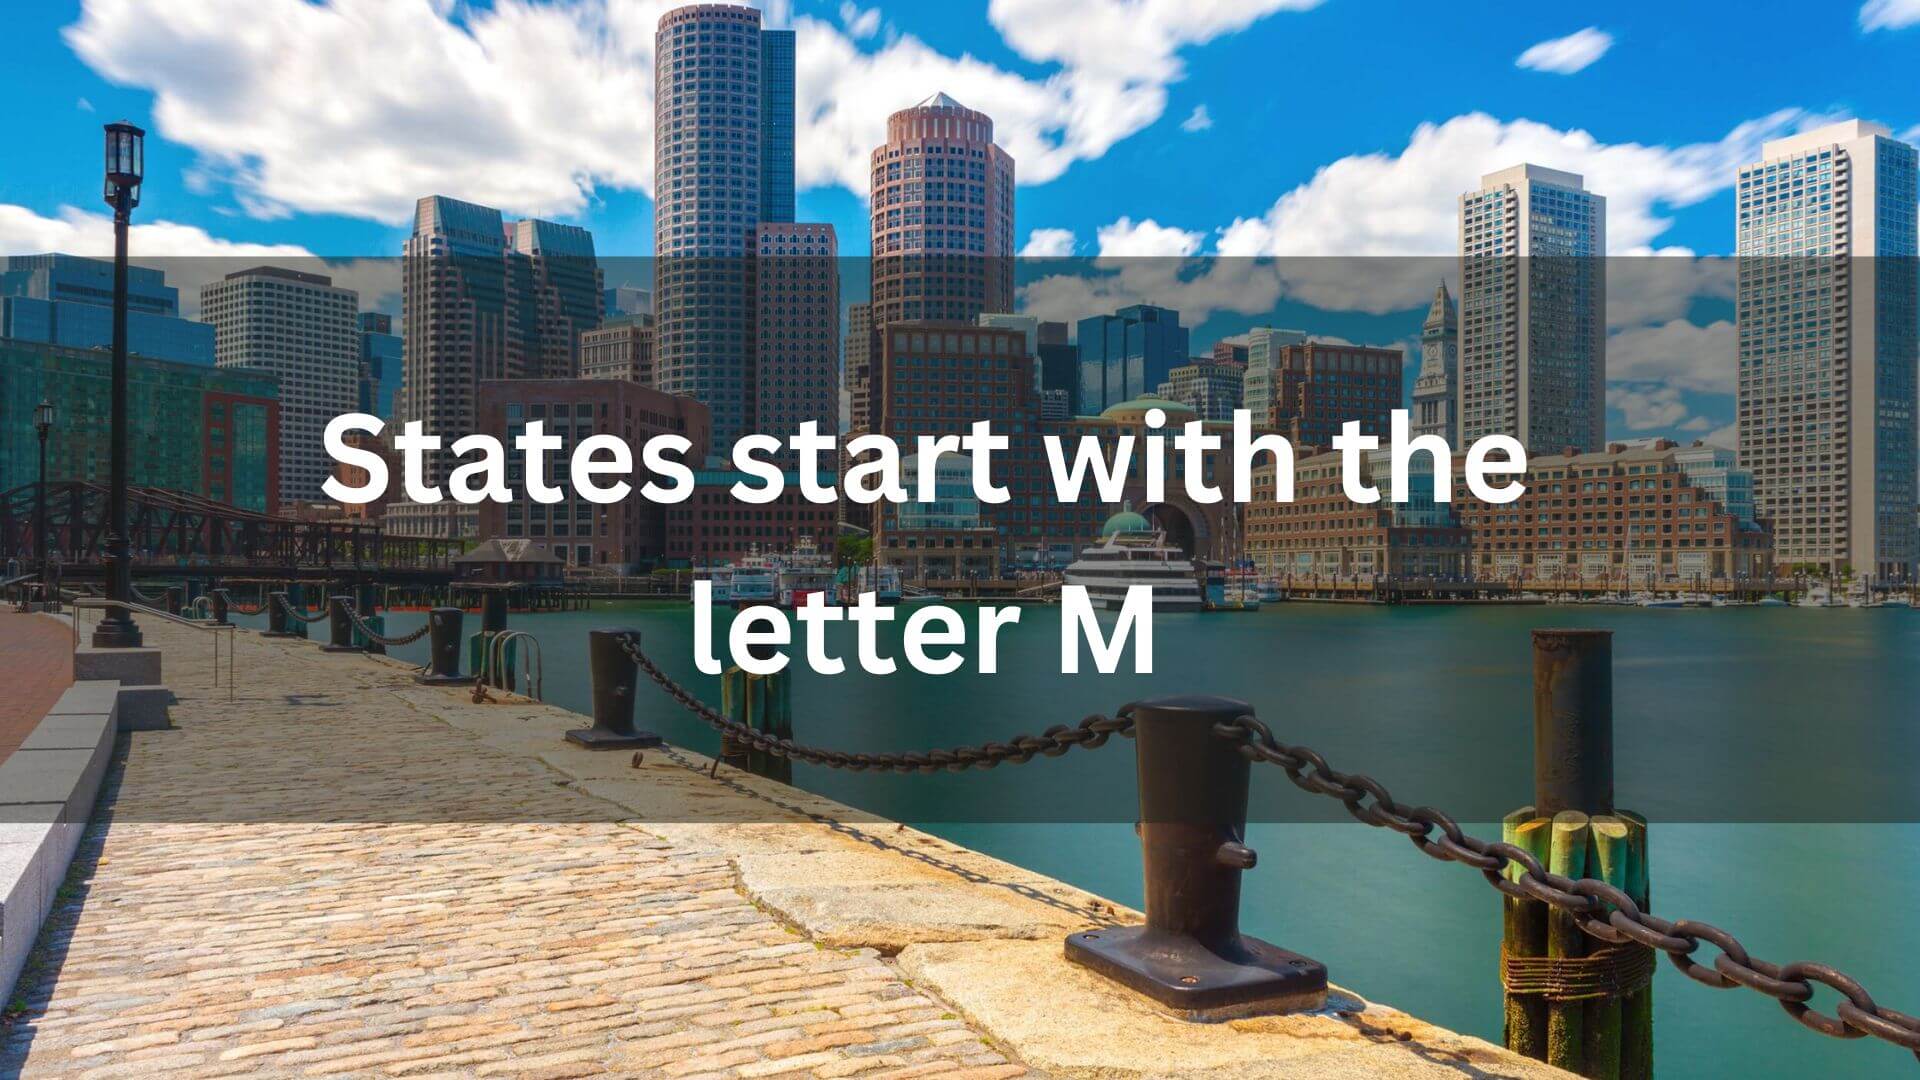 How many states start with the letter M?